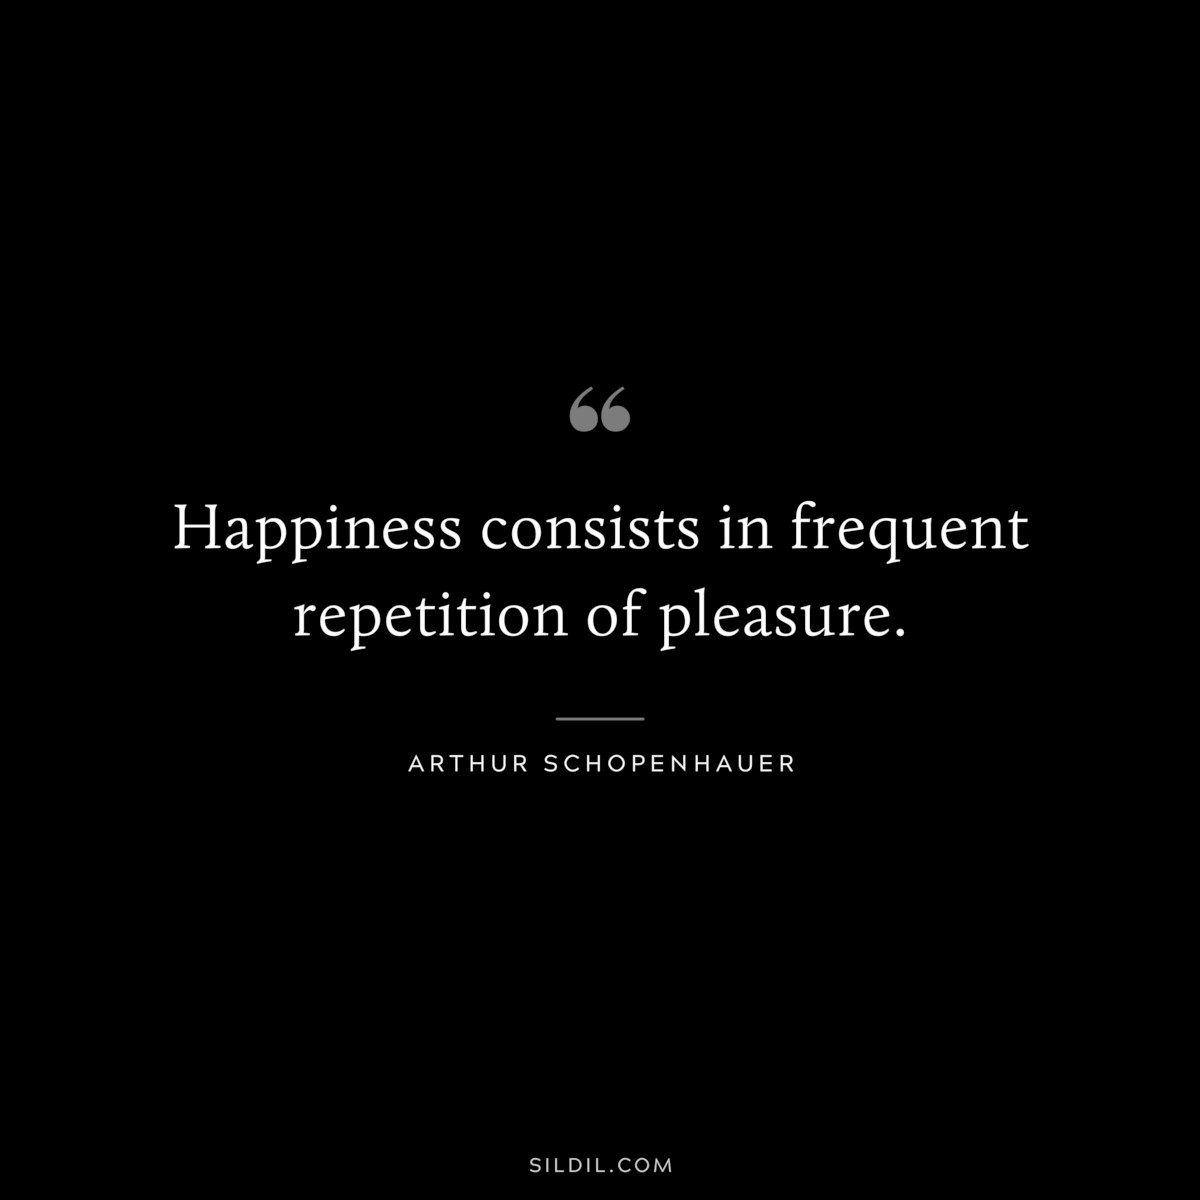 Happiness consists in frequent repetition of pleasure. ― Arthur Schopenhauer